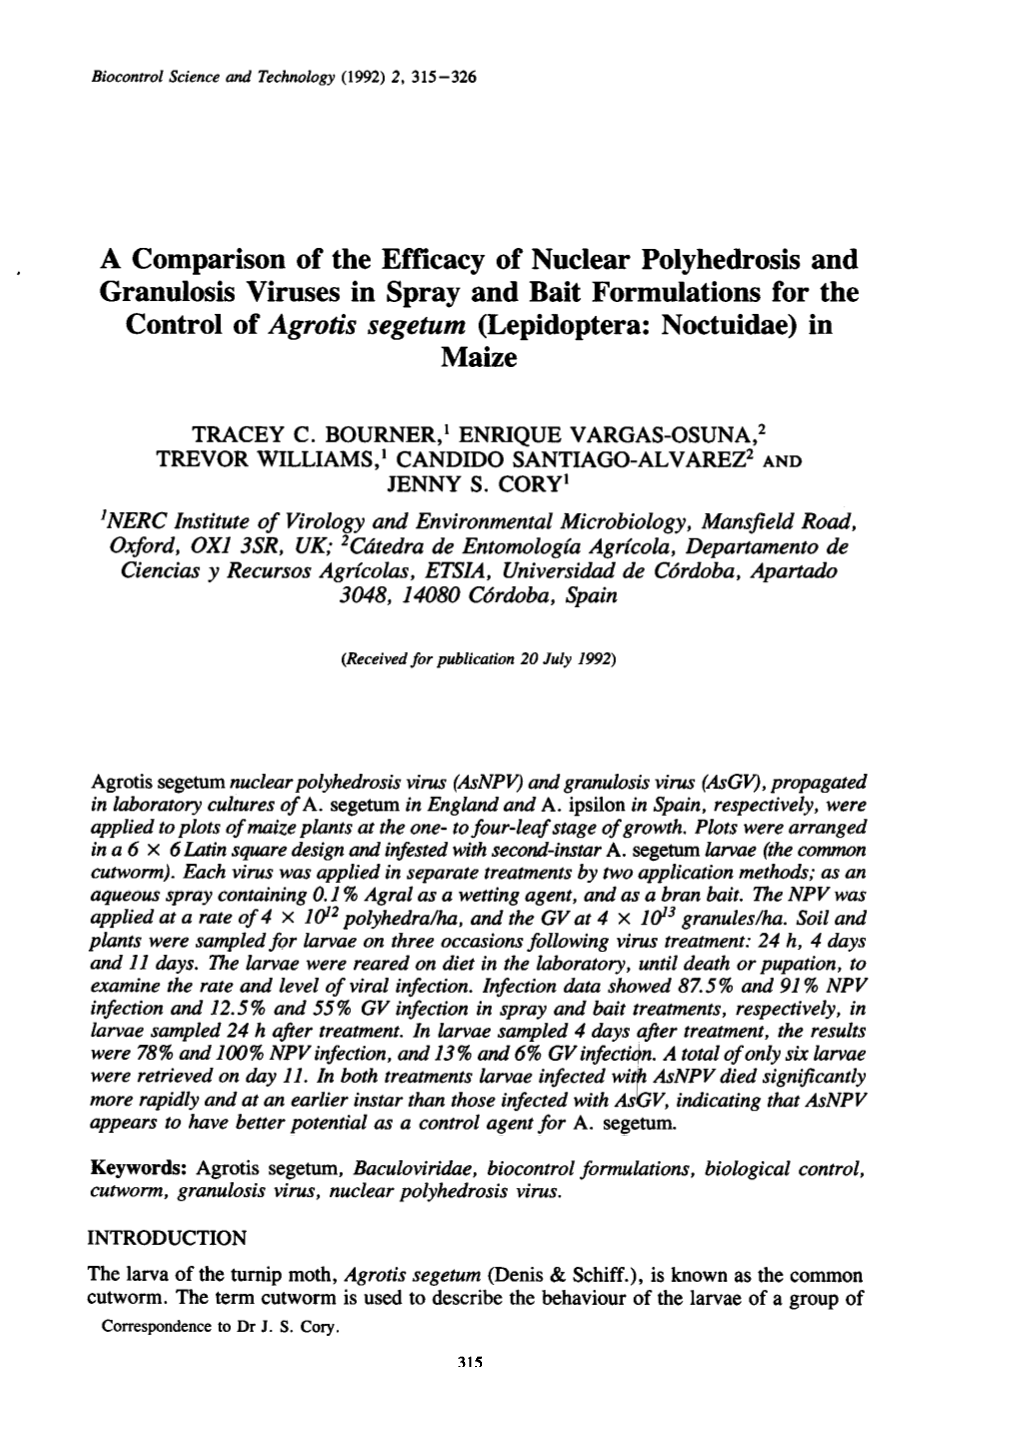 A Comparison of the Efficacy of Nuclear Polyhedrosis And